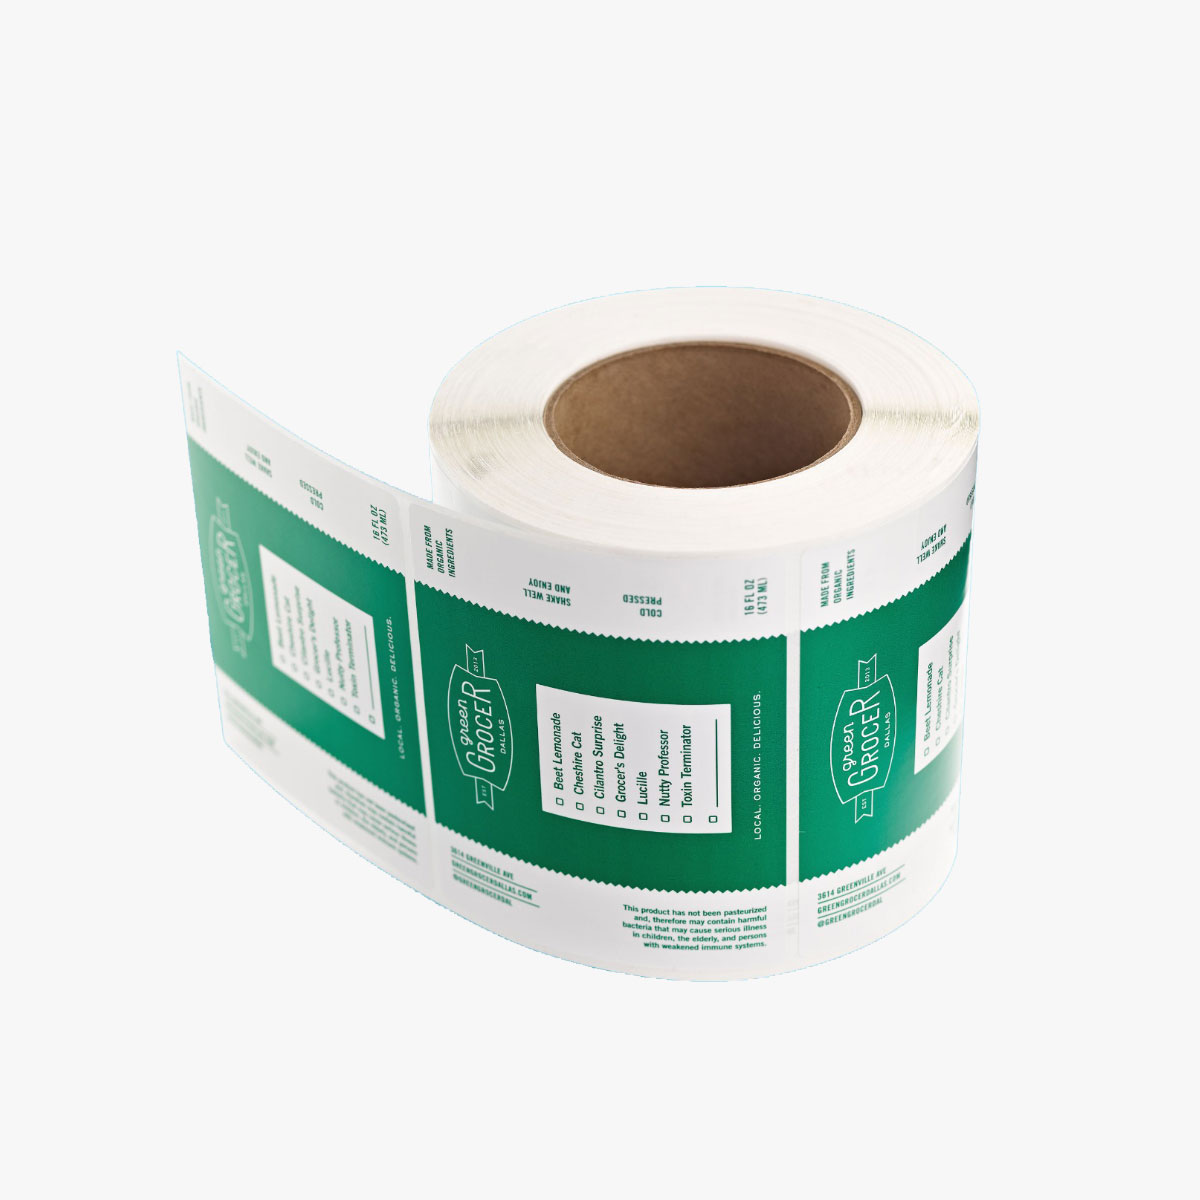 custom-sticky-labels-print-a4-sticky-labels-at-wholesale-prices